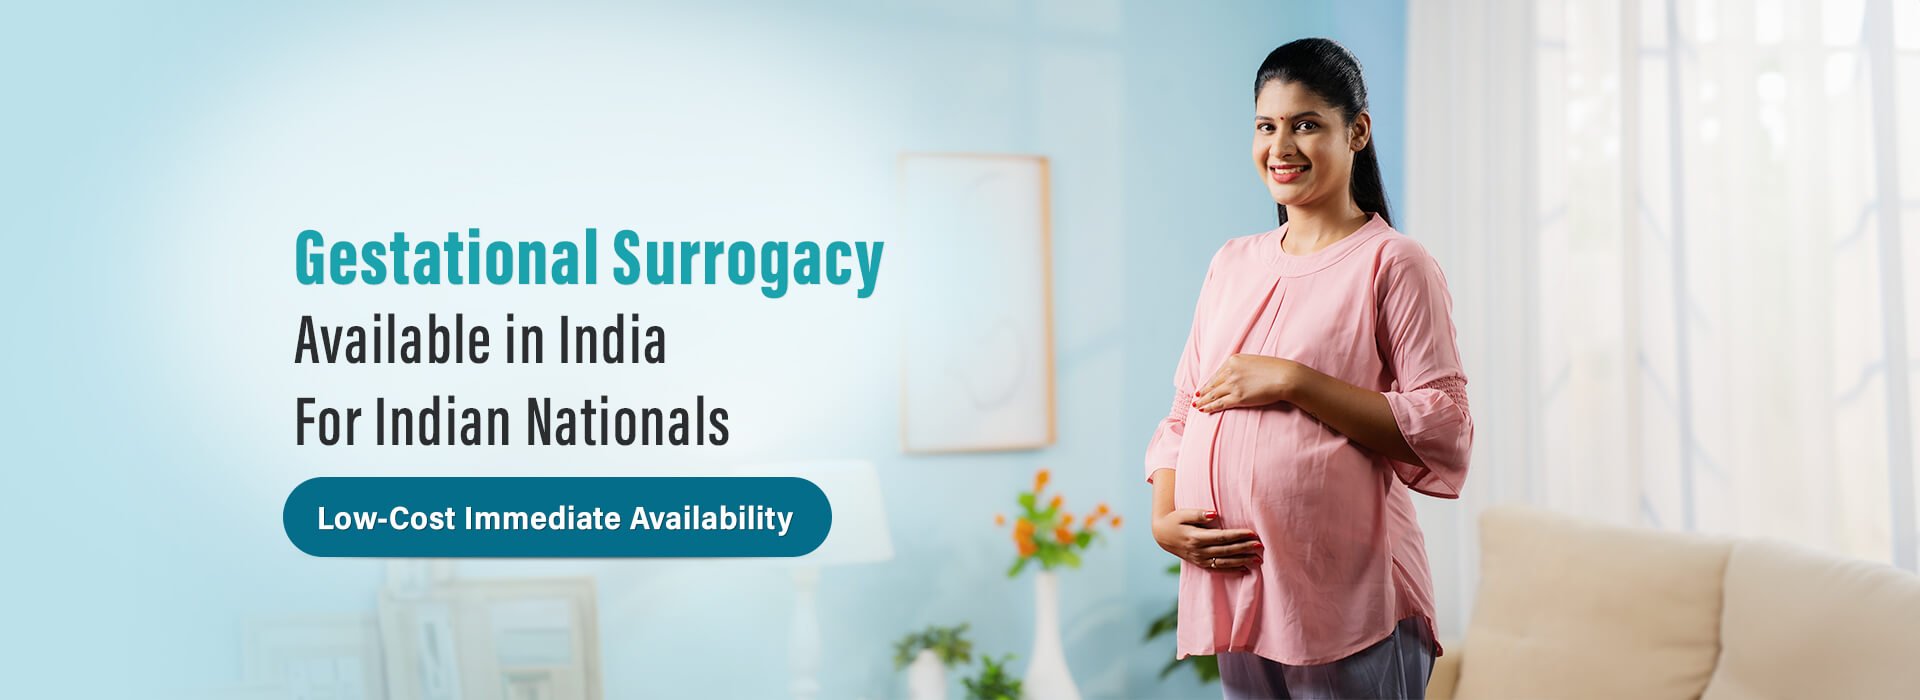 Gestational Surrogacy Available in India For Indian Nationals